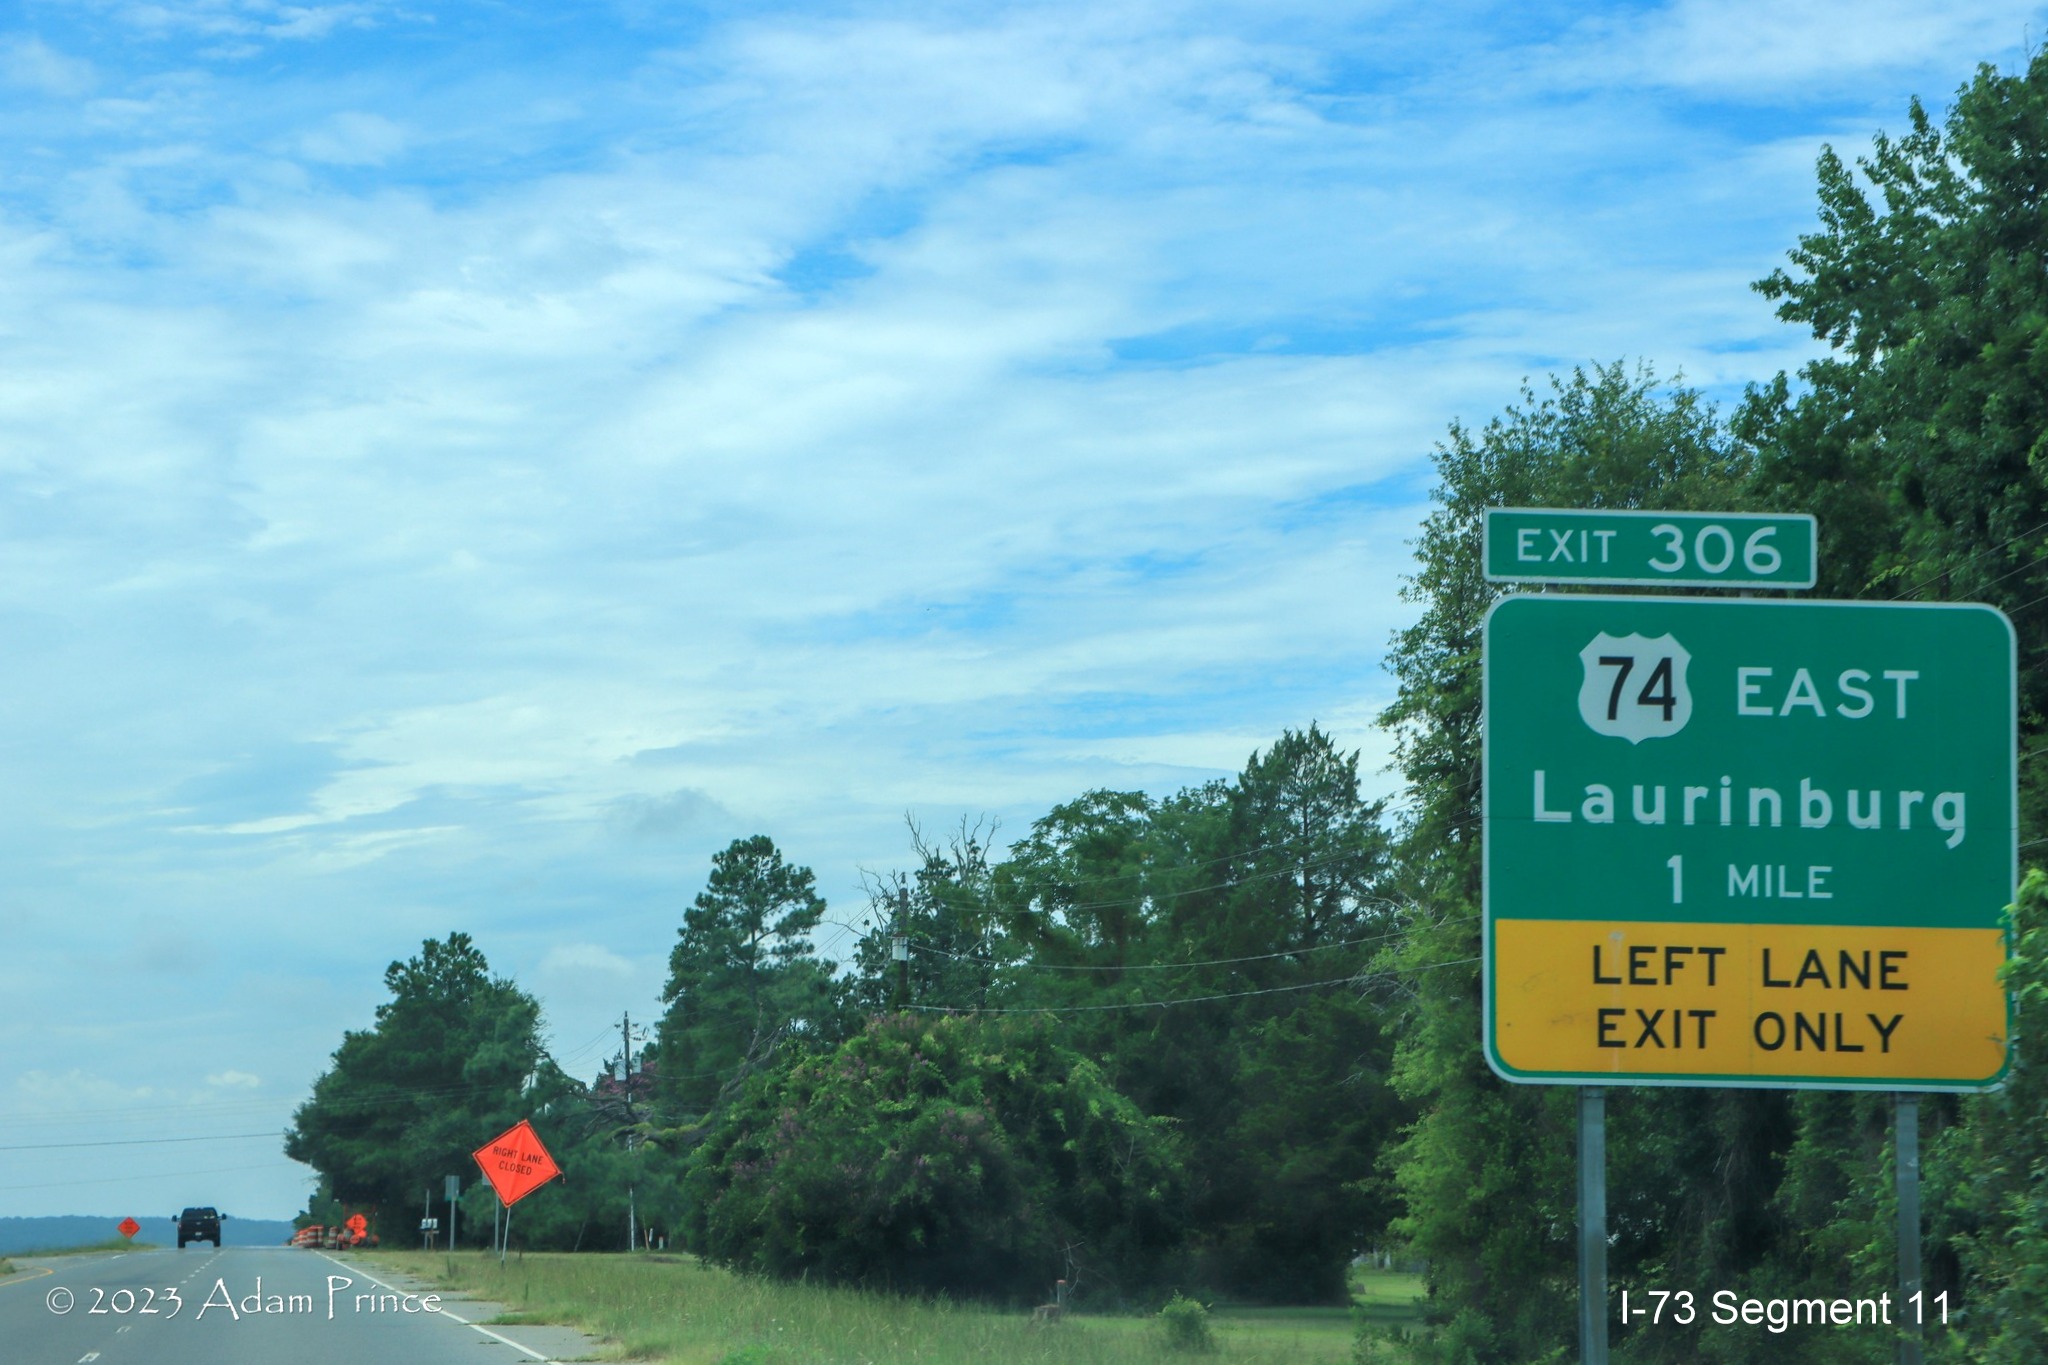 Image of 1 Mile advance sign for US 74 East exit on Business 74 West prior to I-73/I-74 Rockingham
        Bypass construction zone, Adam Prince July 2023